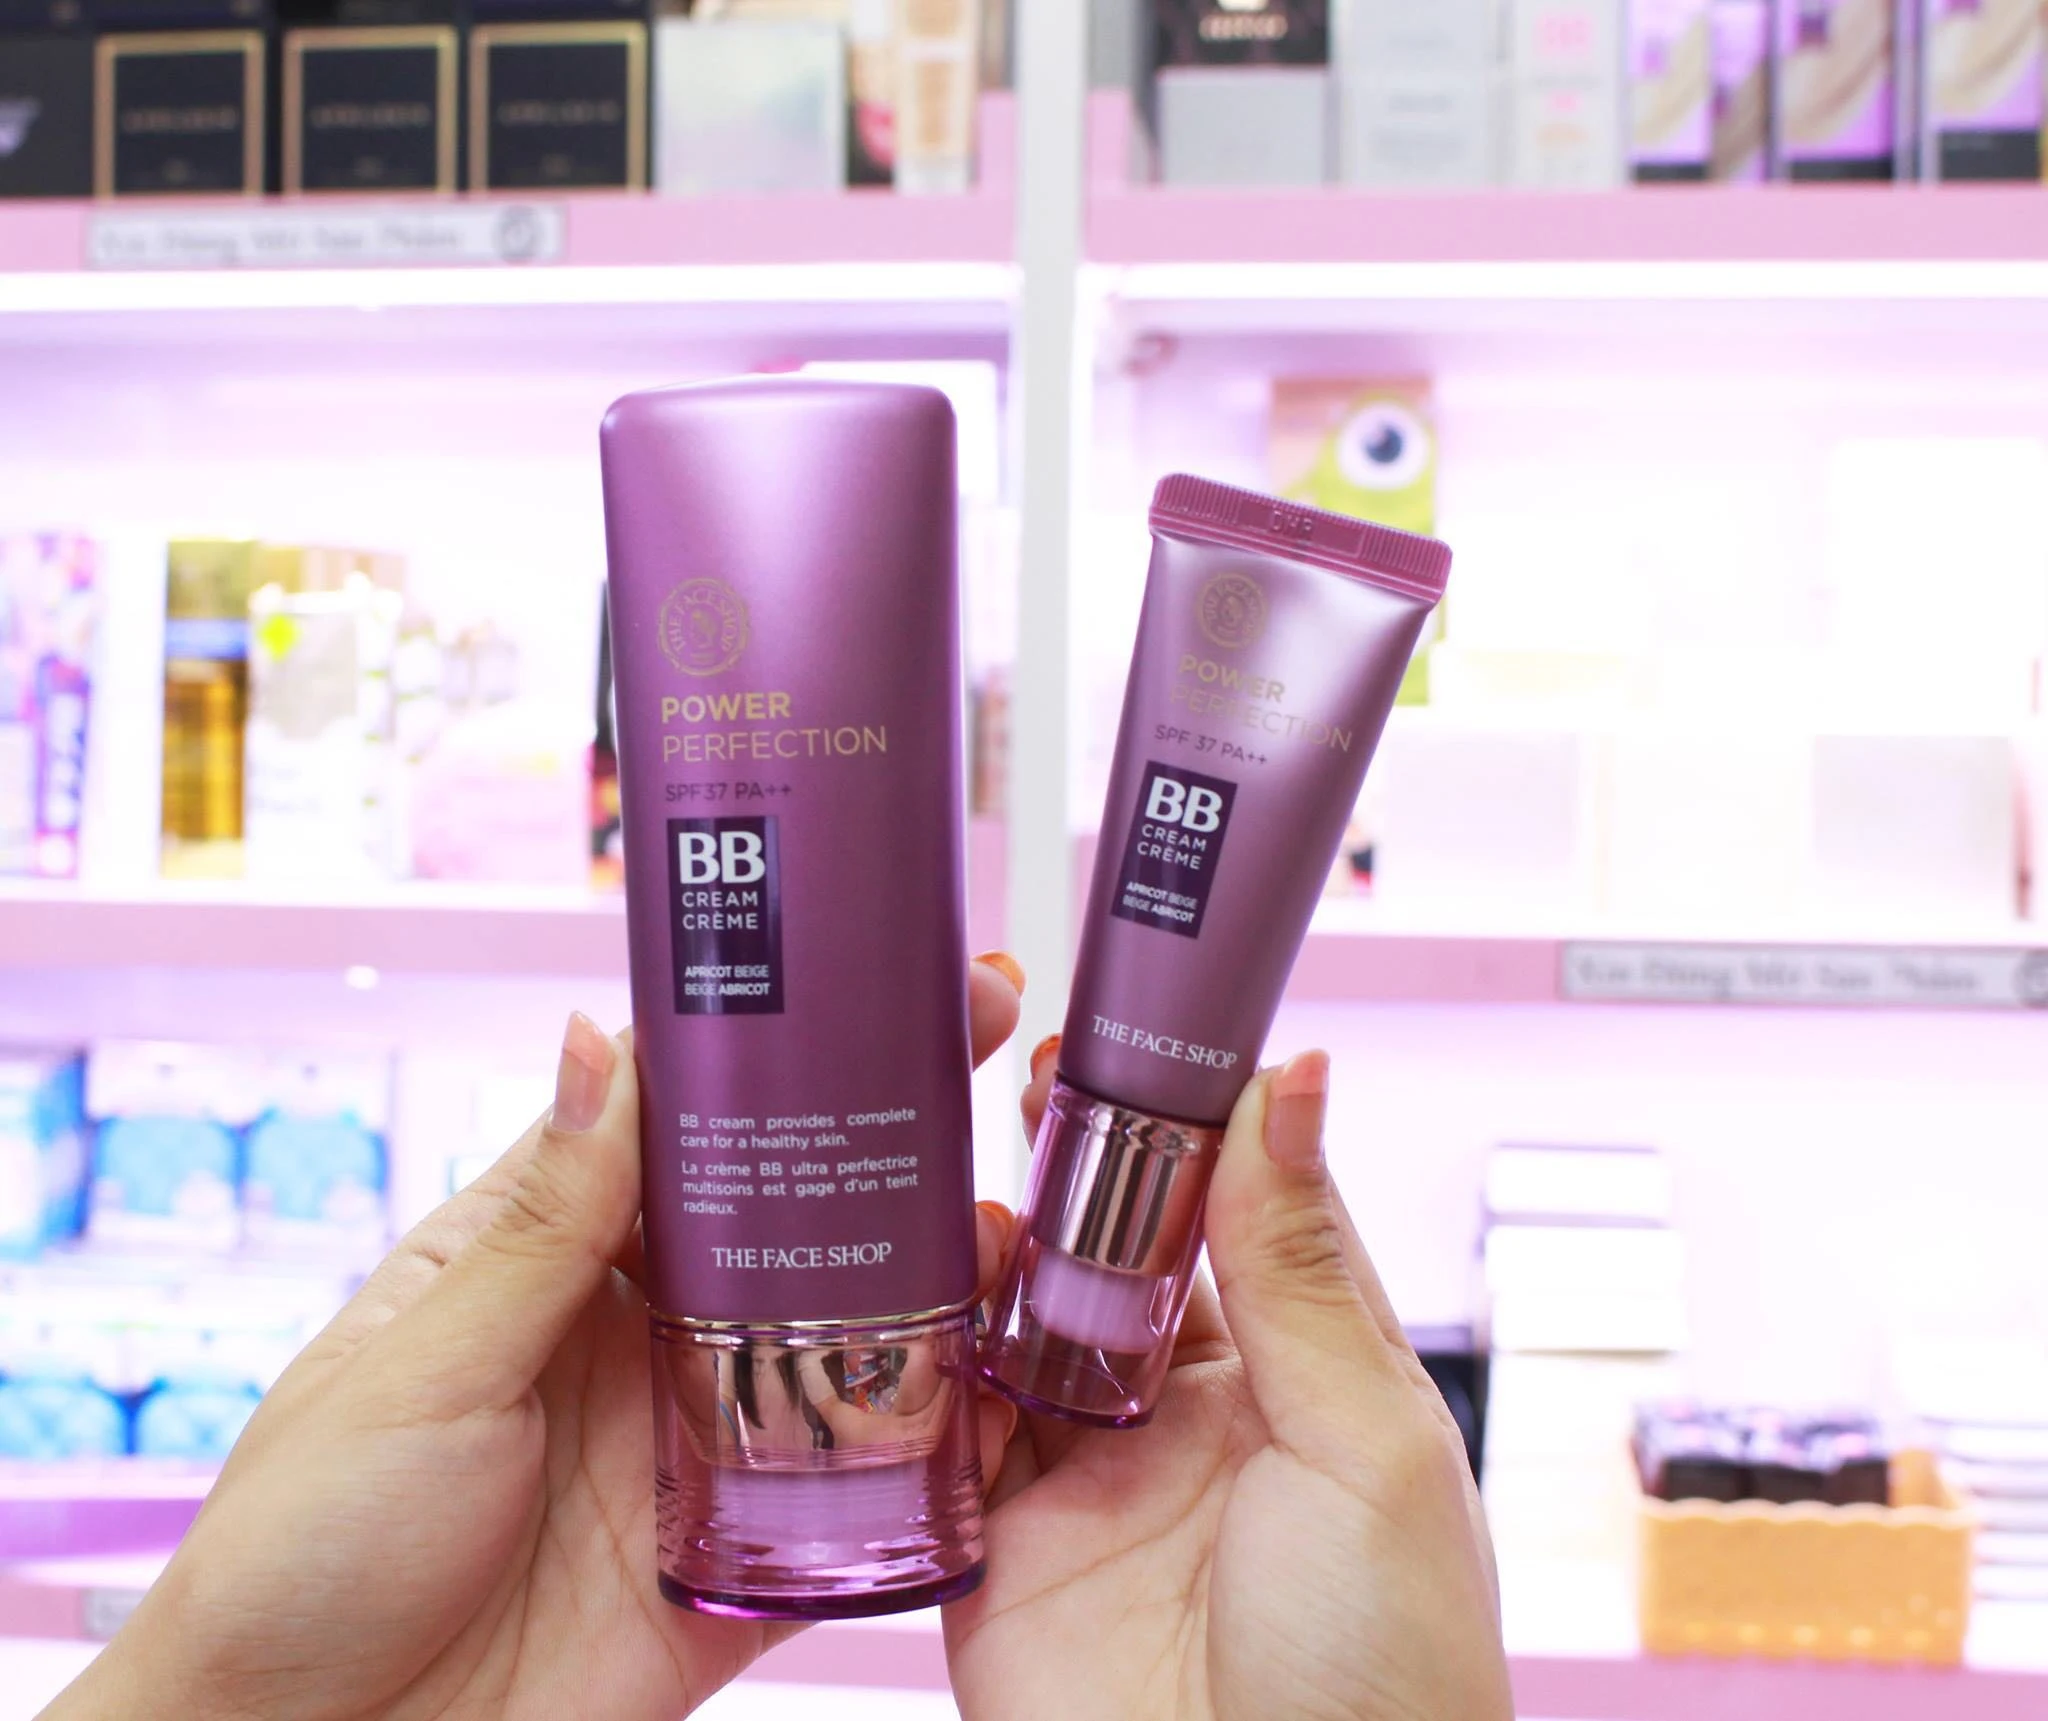 BB Cream The Face Shop Power Perfection SPF37 PA++ 